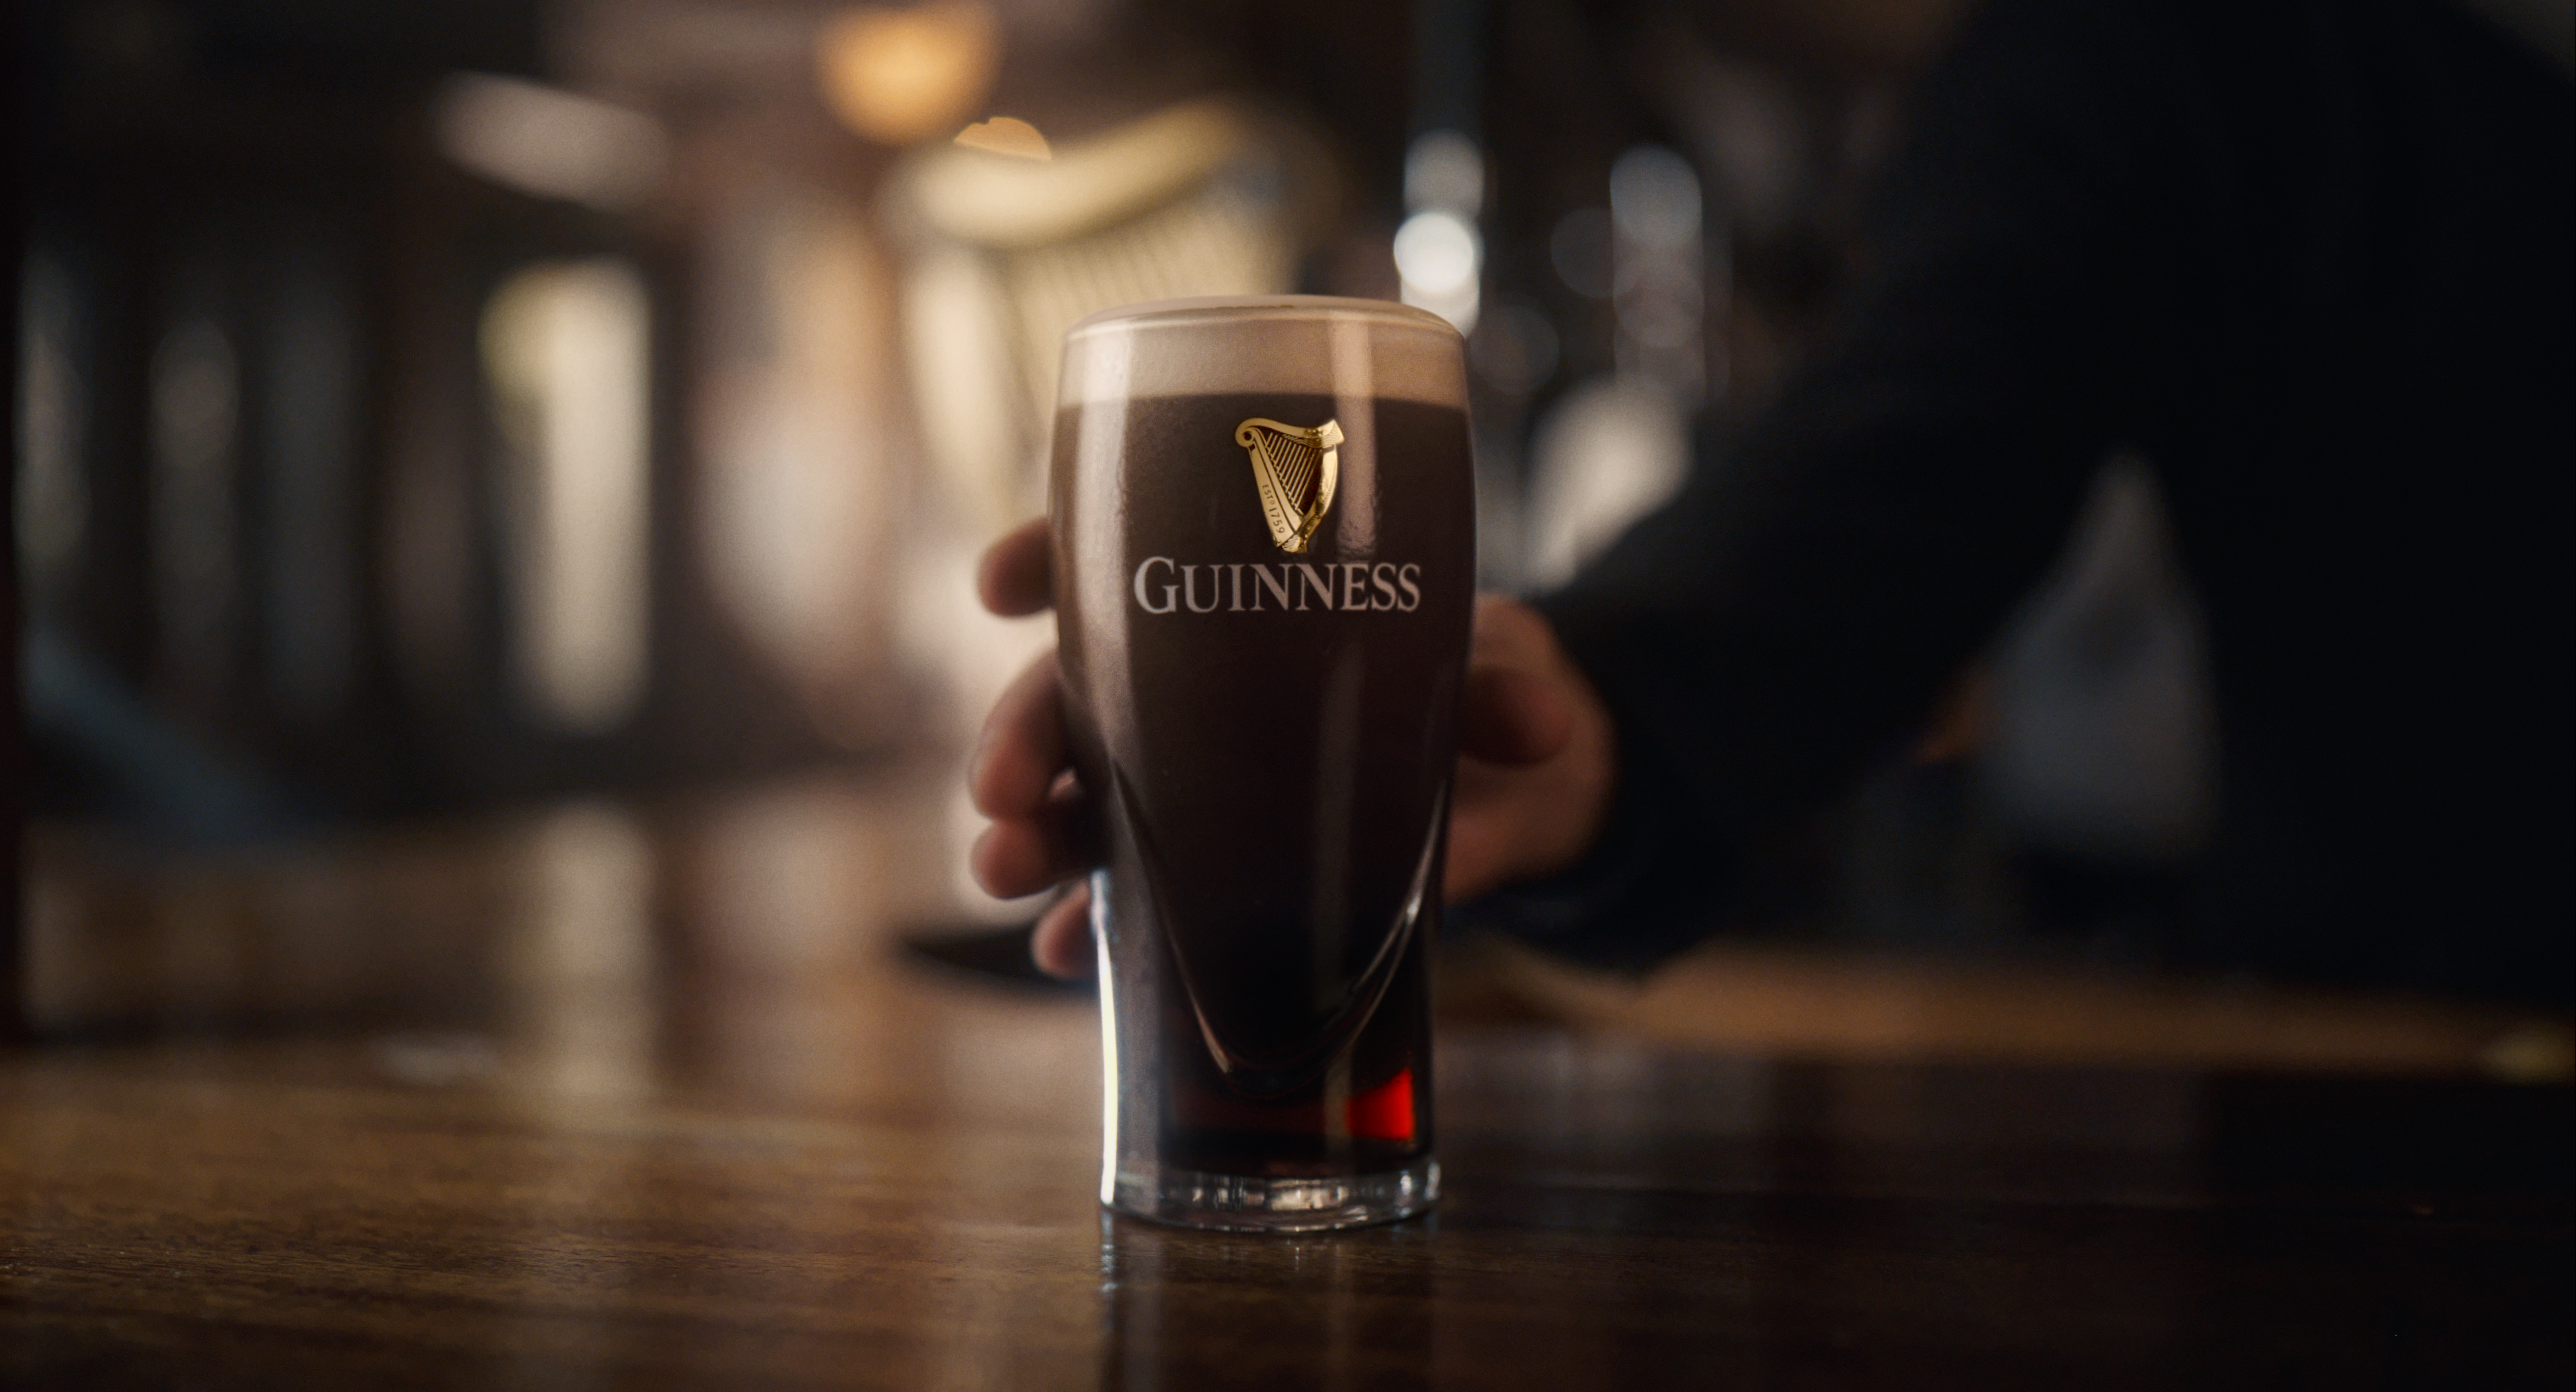 Guinness Unveils Ode To The Pubs Ahead Of Reopening By Reminding Fans ‘GOOD THINGS COME TO THOSE WHO WAIT’